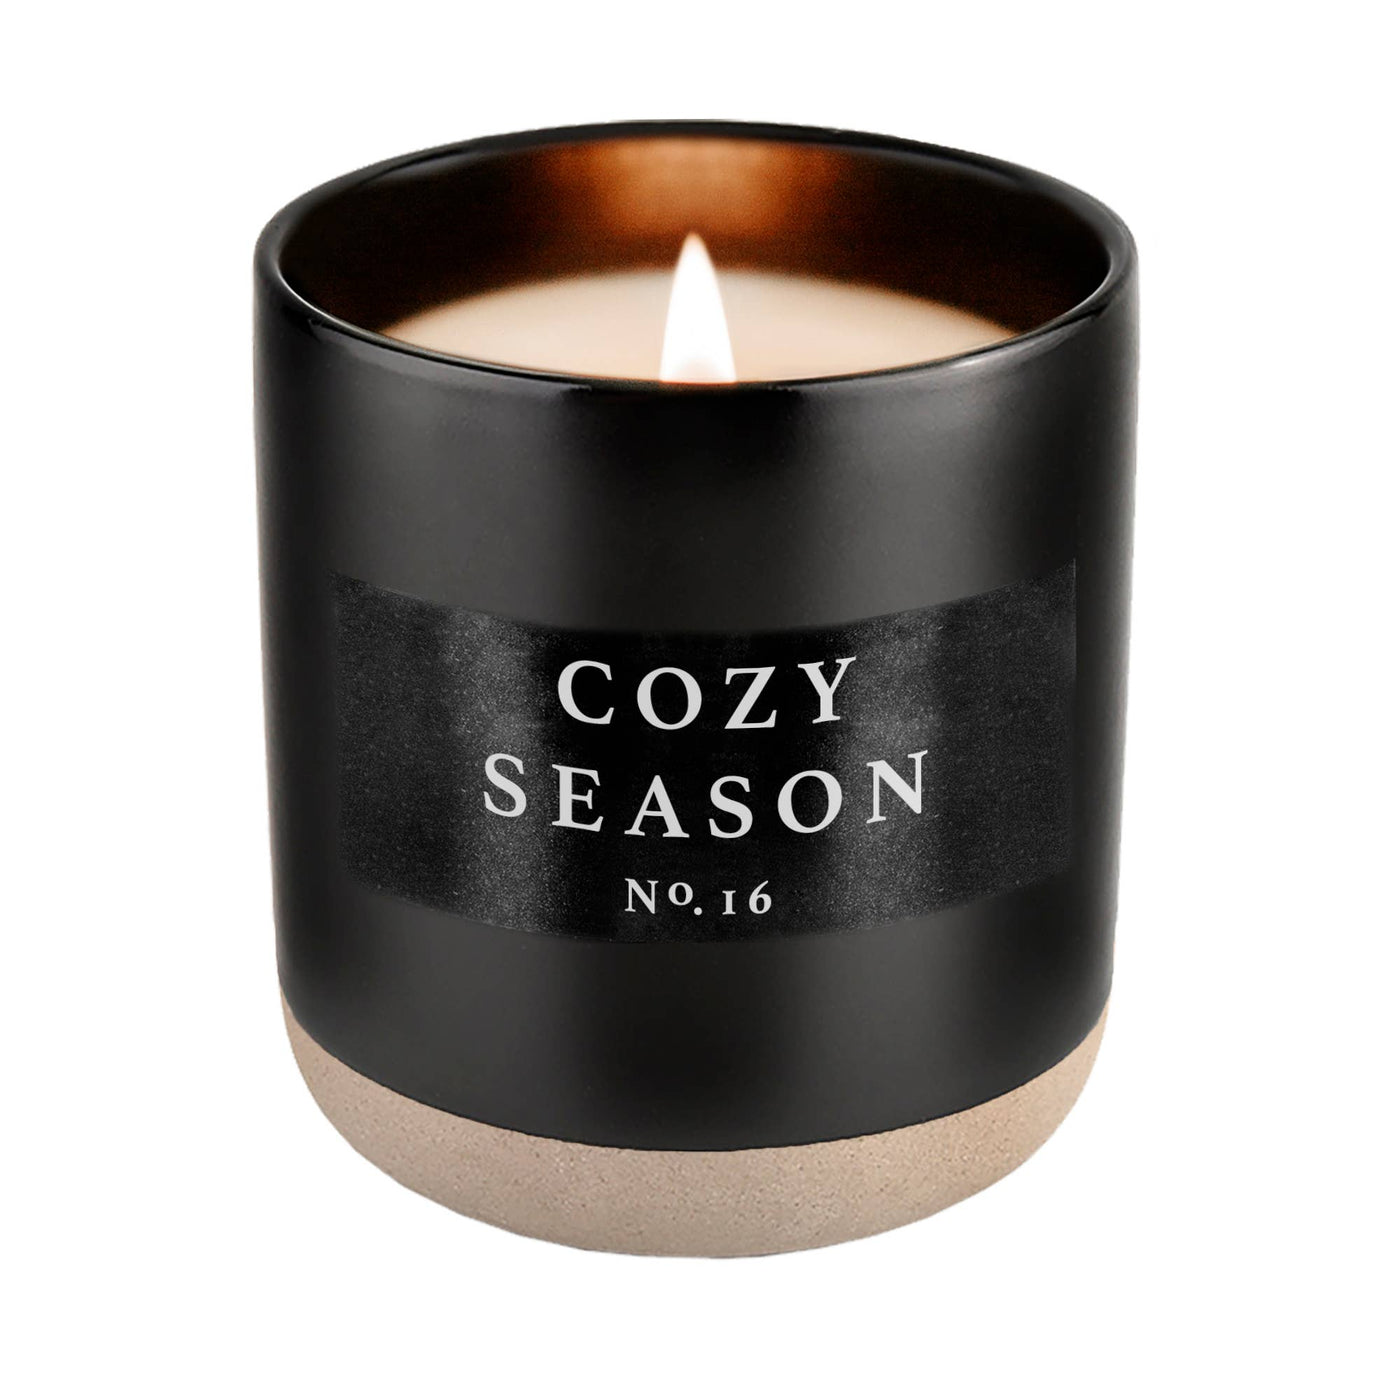 Cozy Season 12 oz Soy Candle - Fall Home Decor & Gifts